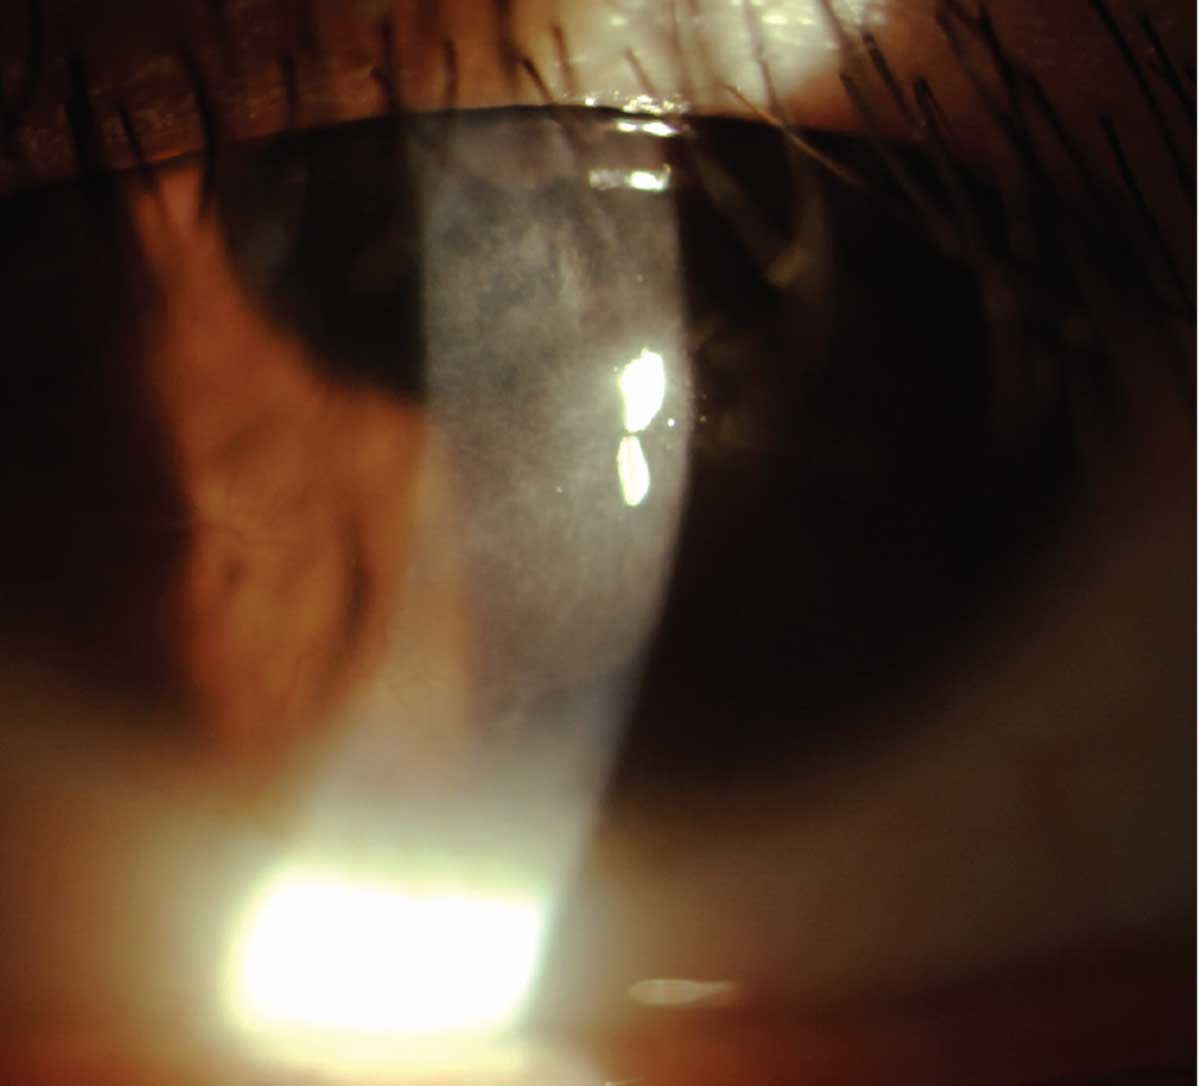 Fig. 1. A well-centered, empirically designed orthokeratology lens is evaluated on-eye at the dispensing visit. The sodium fluorescein dye is absent in the central treatment zone and midperipheral alignment curves.